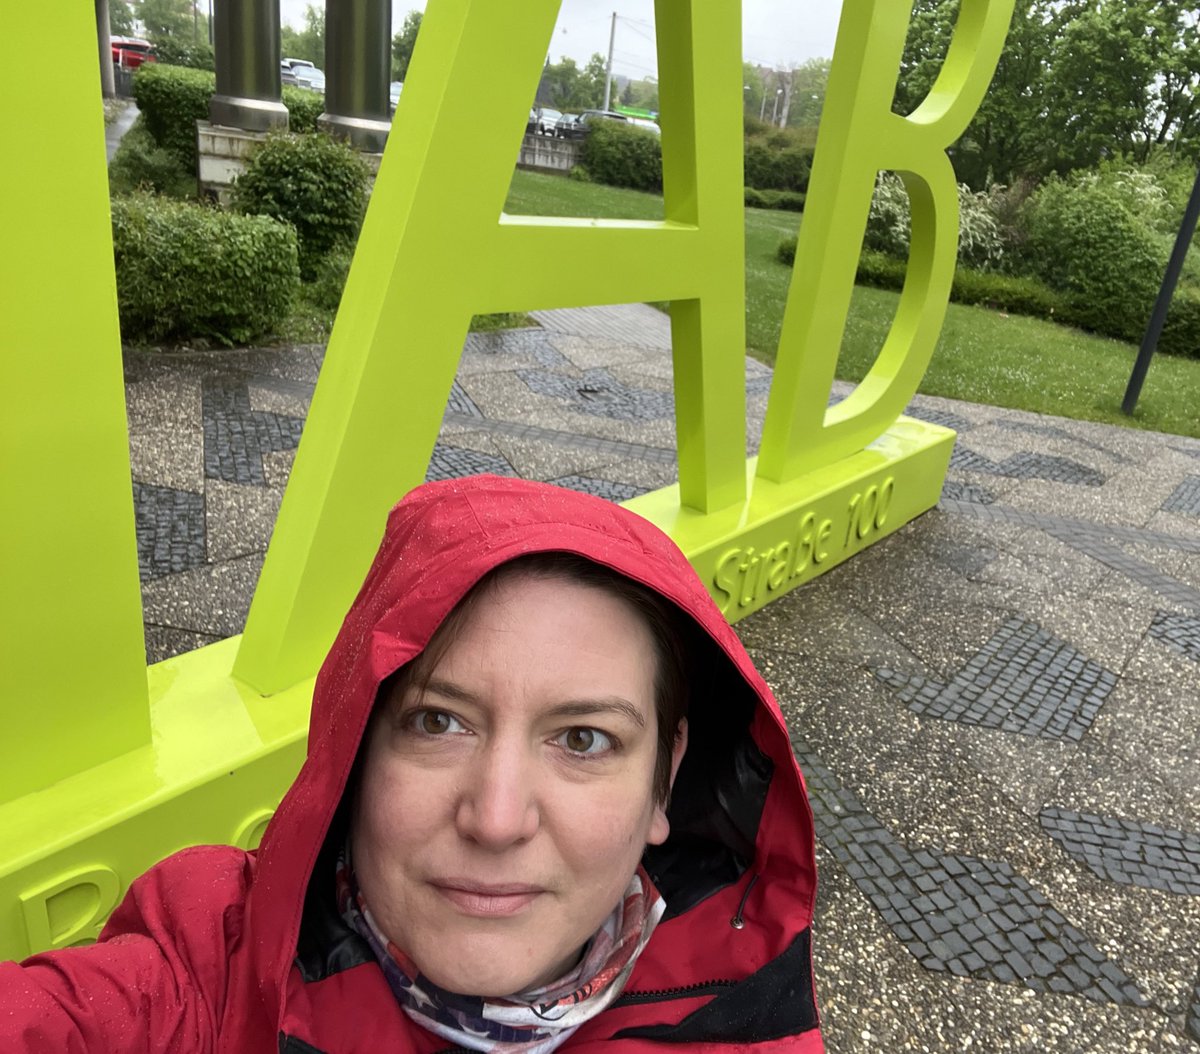 Rainy welcome in Nürnberg today - but still very nice at IAB! Thanks for hosting me ☺️